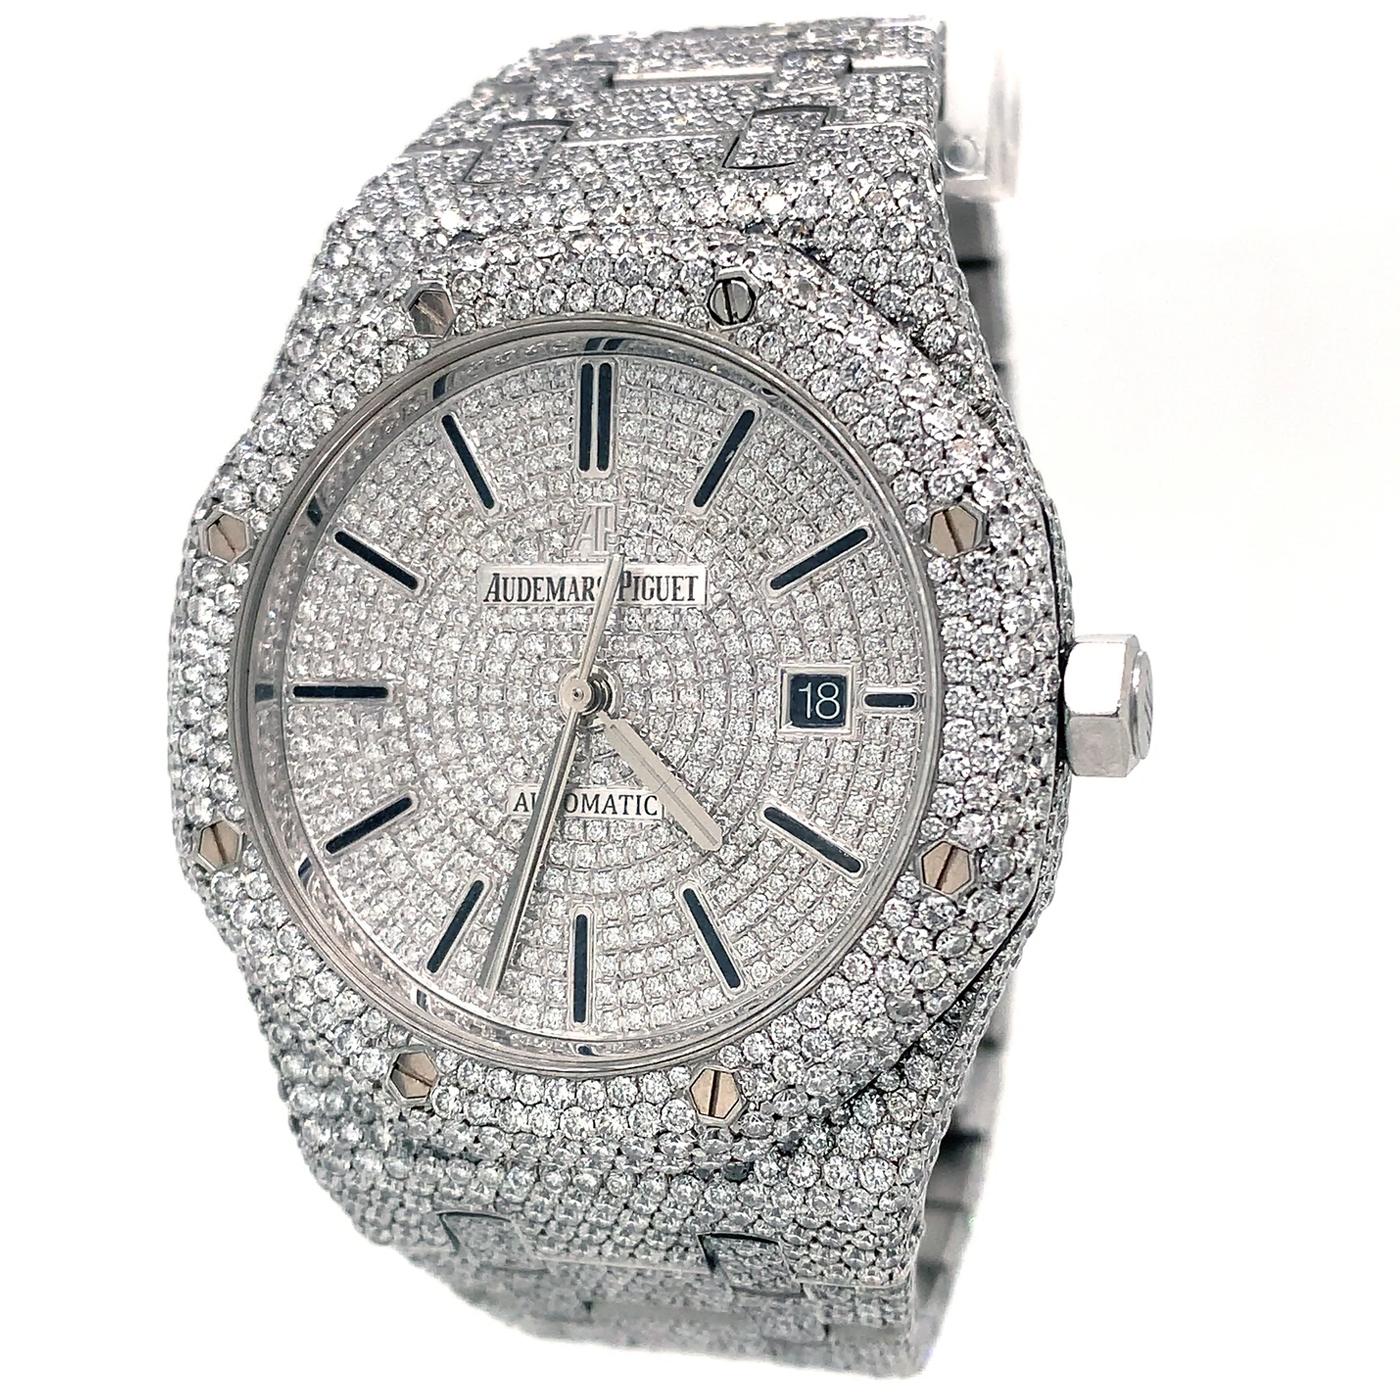 Details:
Brand: Audemars Piguet
Model: Royal Oak ICED OUT (After Market Diamonds)
Movement: Automatic
Case material: Steel
Bracelet material: Steel
Gender: Men's watch/Unisex
Scope of Delivery: Original Box
Location: United States of America
Case